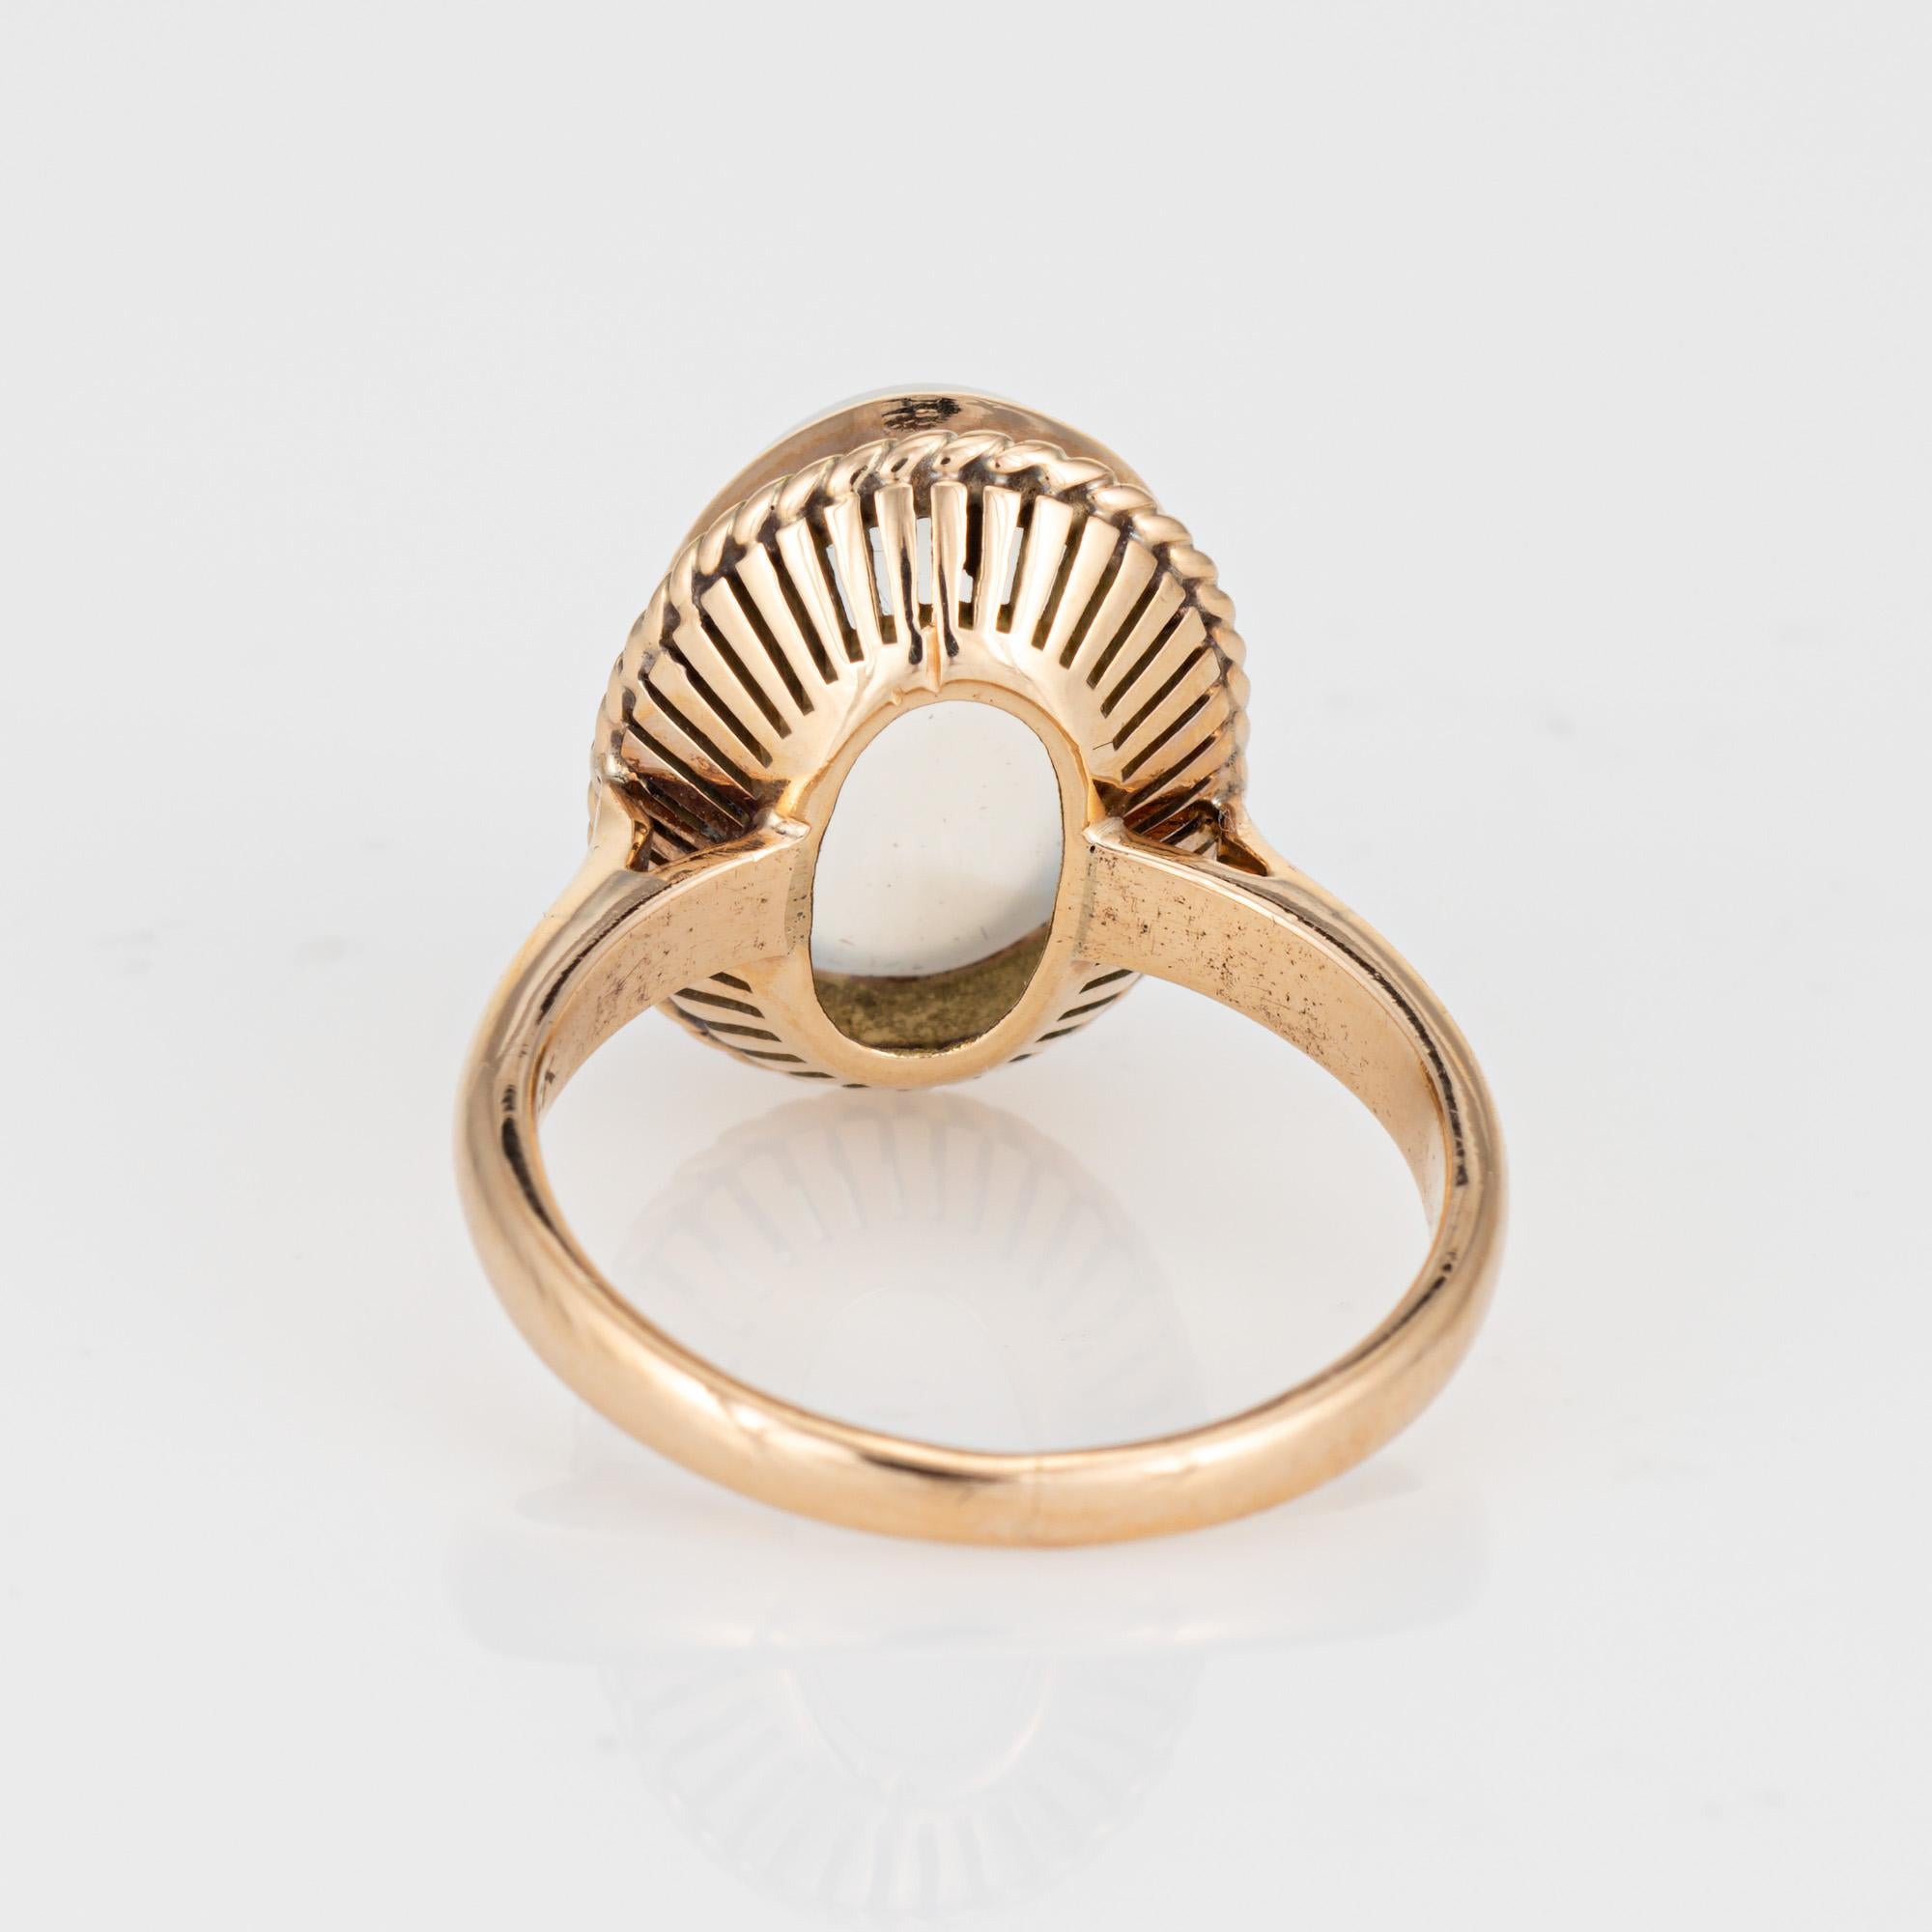 Vintage Moonstone Ring Mid Century 18k Yellow Gold 5.25 Oval Cocktail Jewelry  In Good Condition For Sale In Torrance, CA